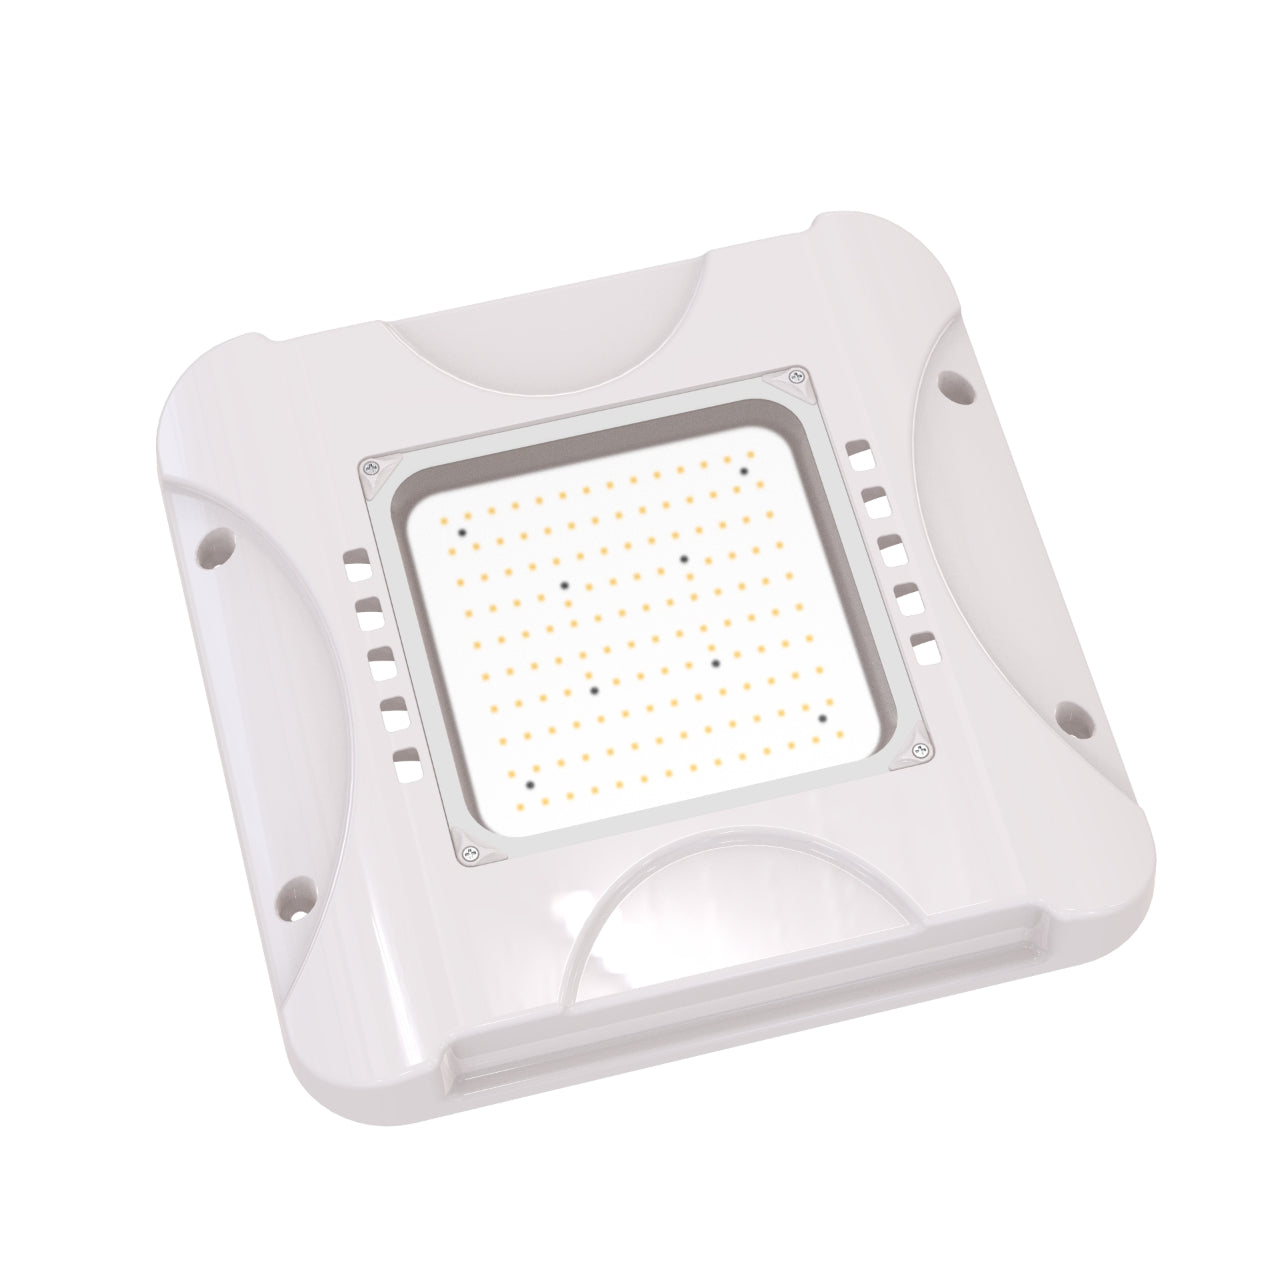 Commodos 150W LED Canopy Light (Launch Special)